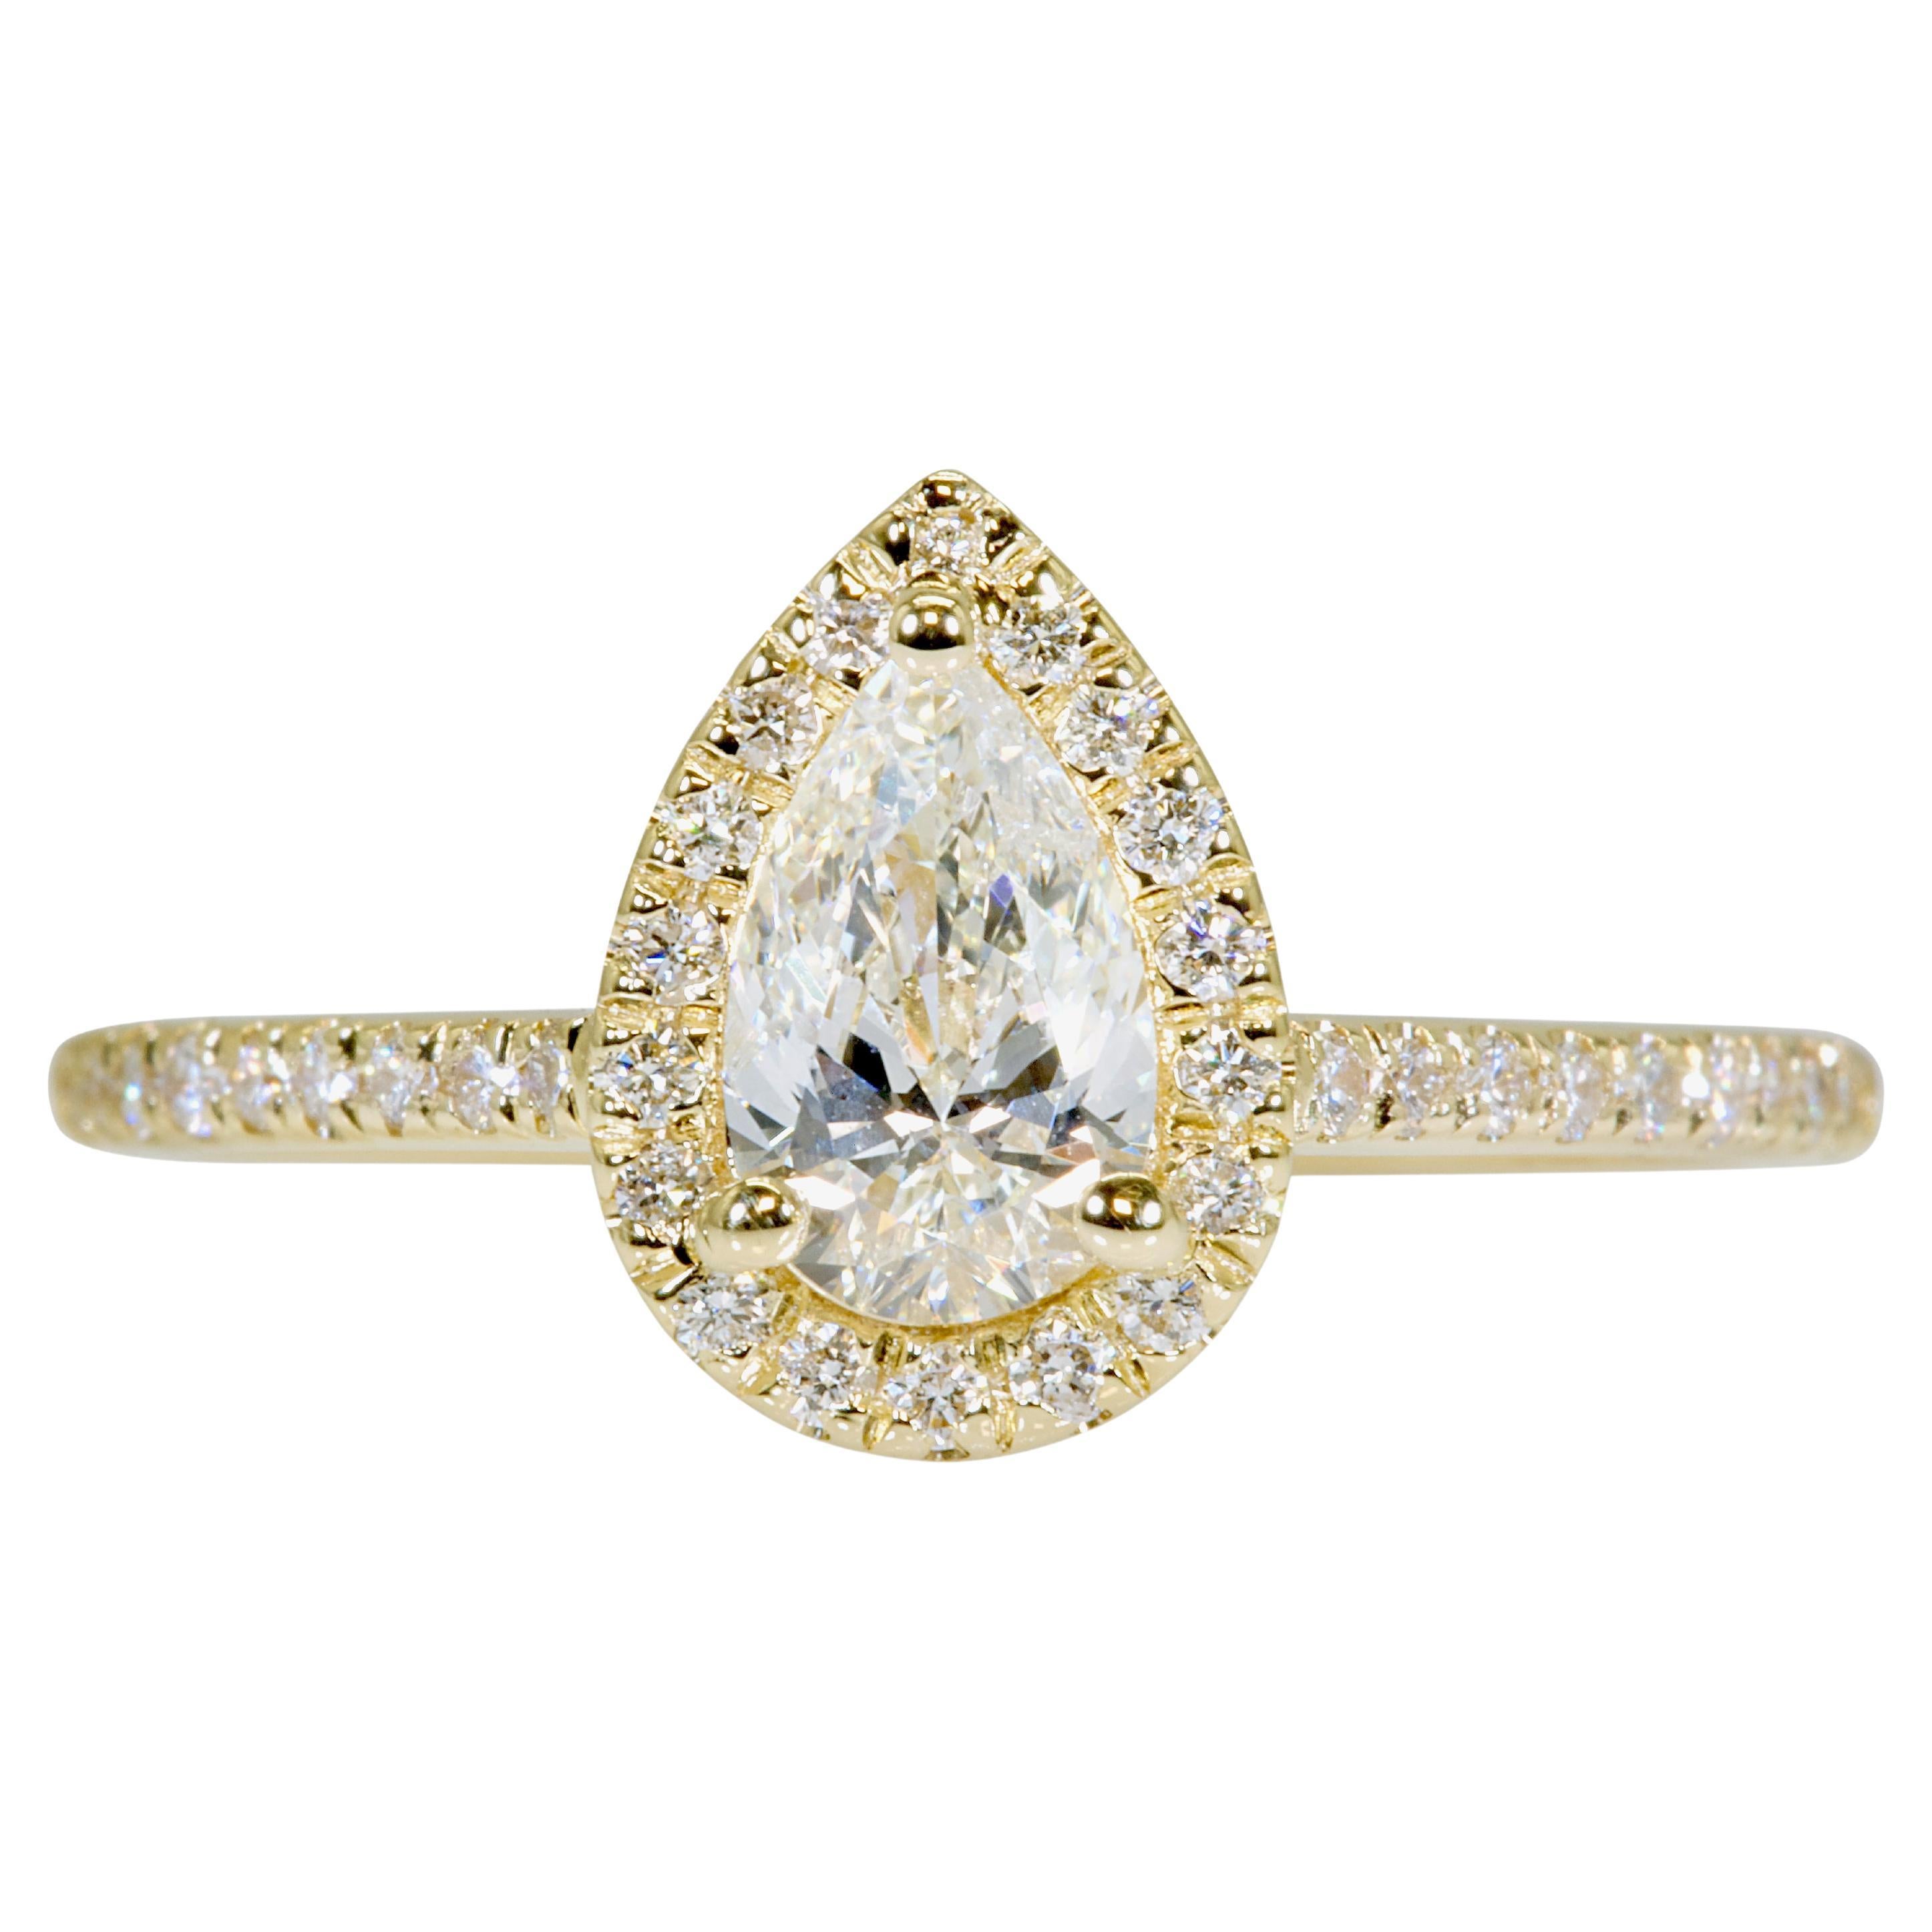 Dazzling 2.66ct Pear-Shaped Diamond Halo Ring in 18k Yellow Gold - GIA Certified For Sale